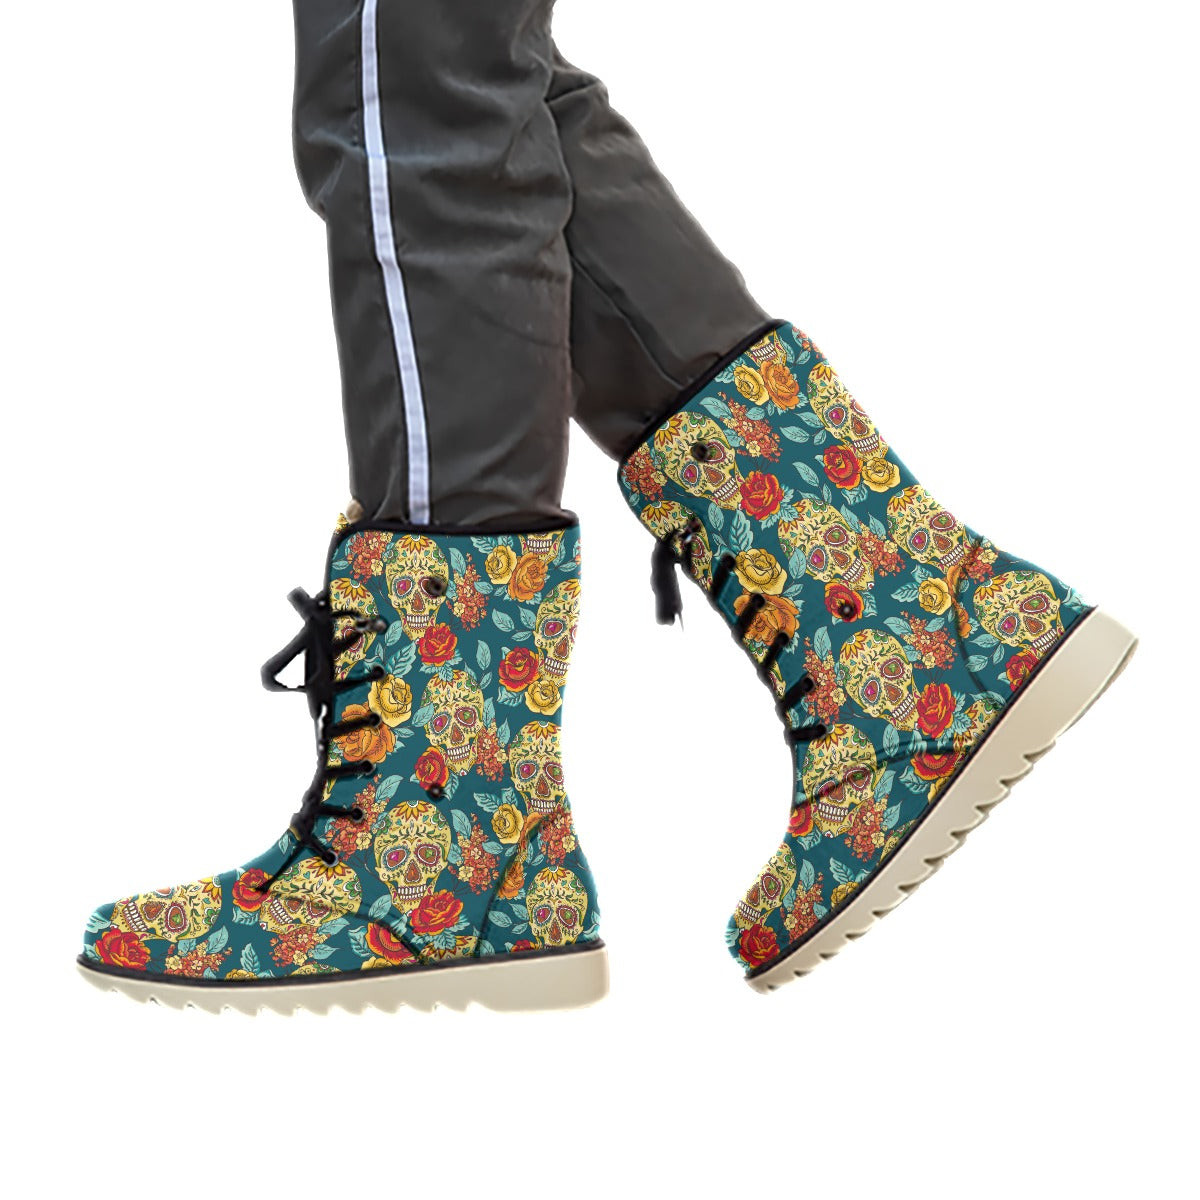 Sugar skull Day of the dead Women's Plush Boots, Mexican skull boots, sugar skull shoes